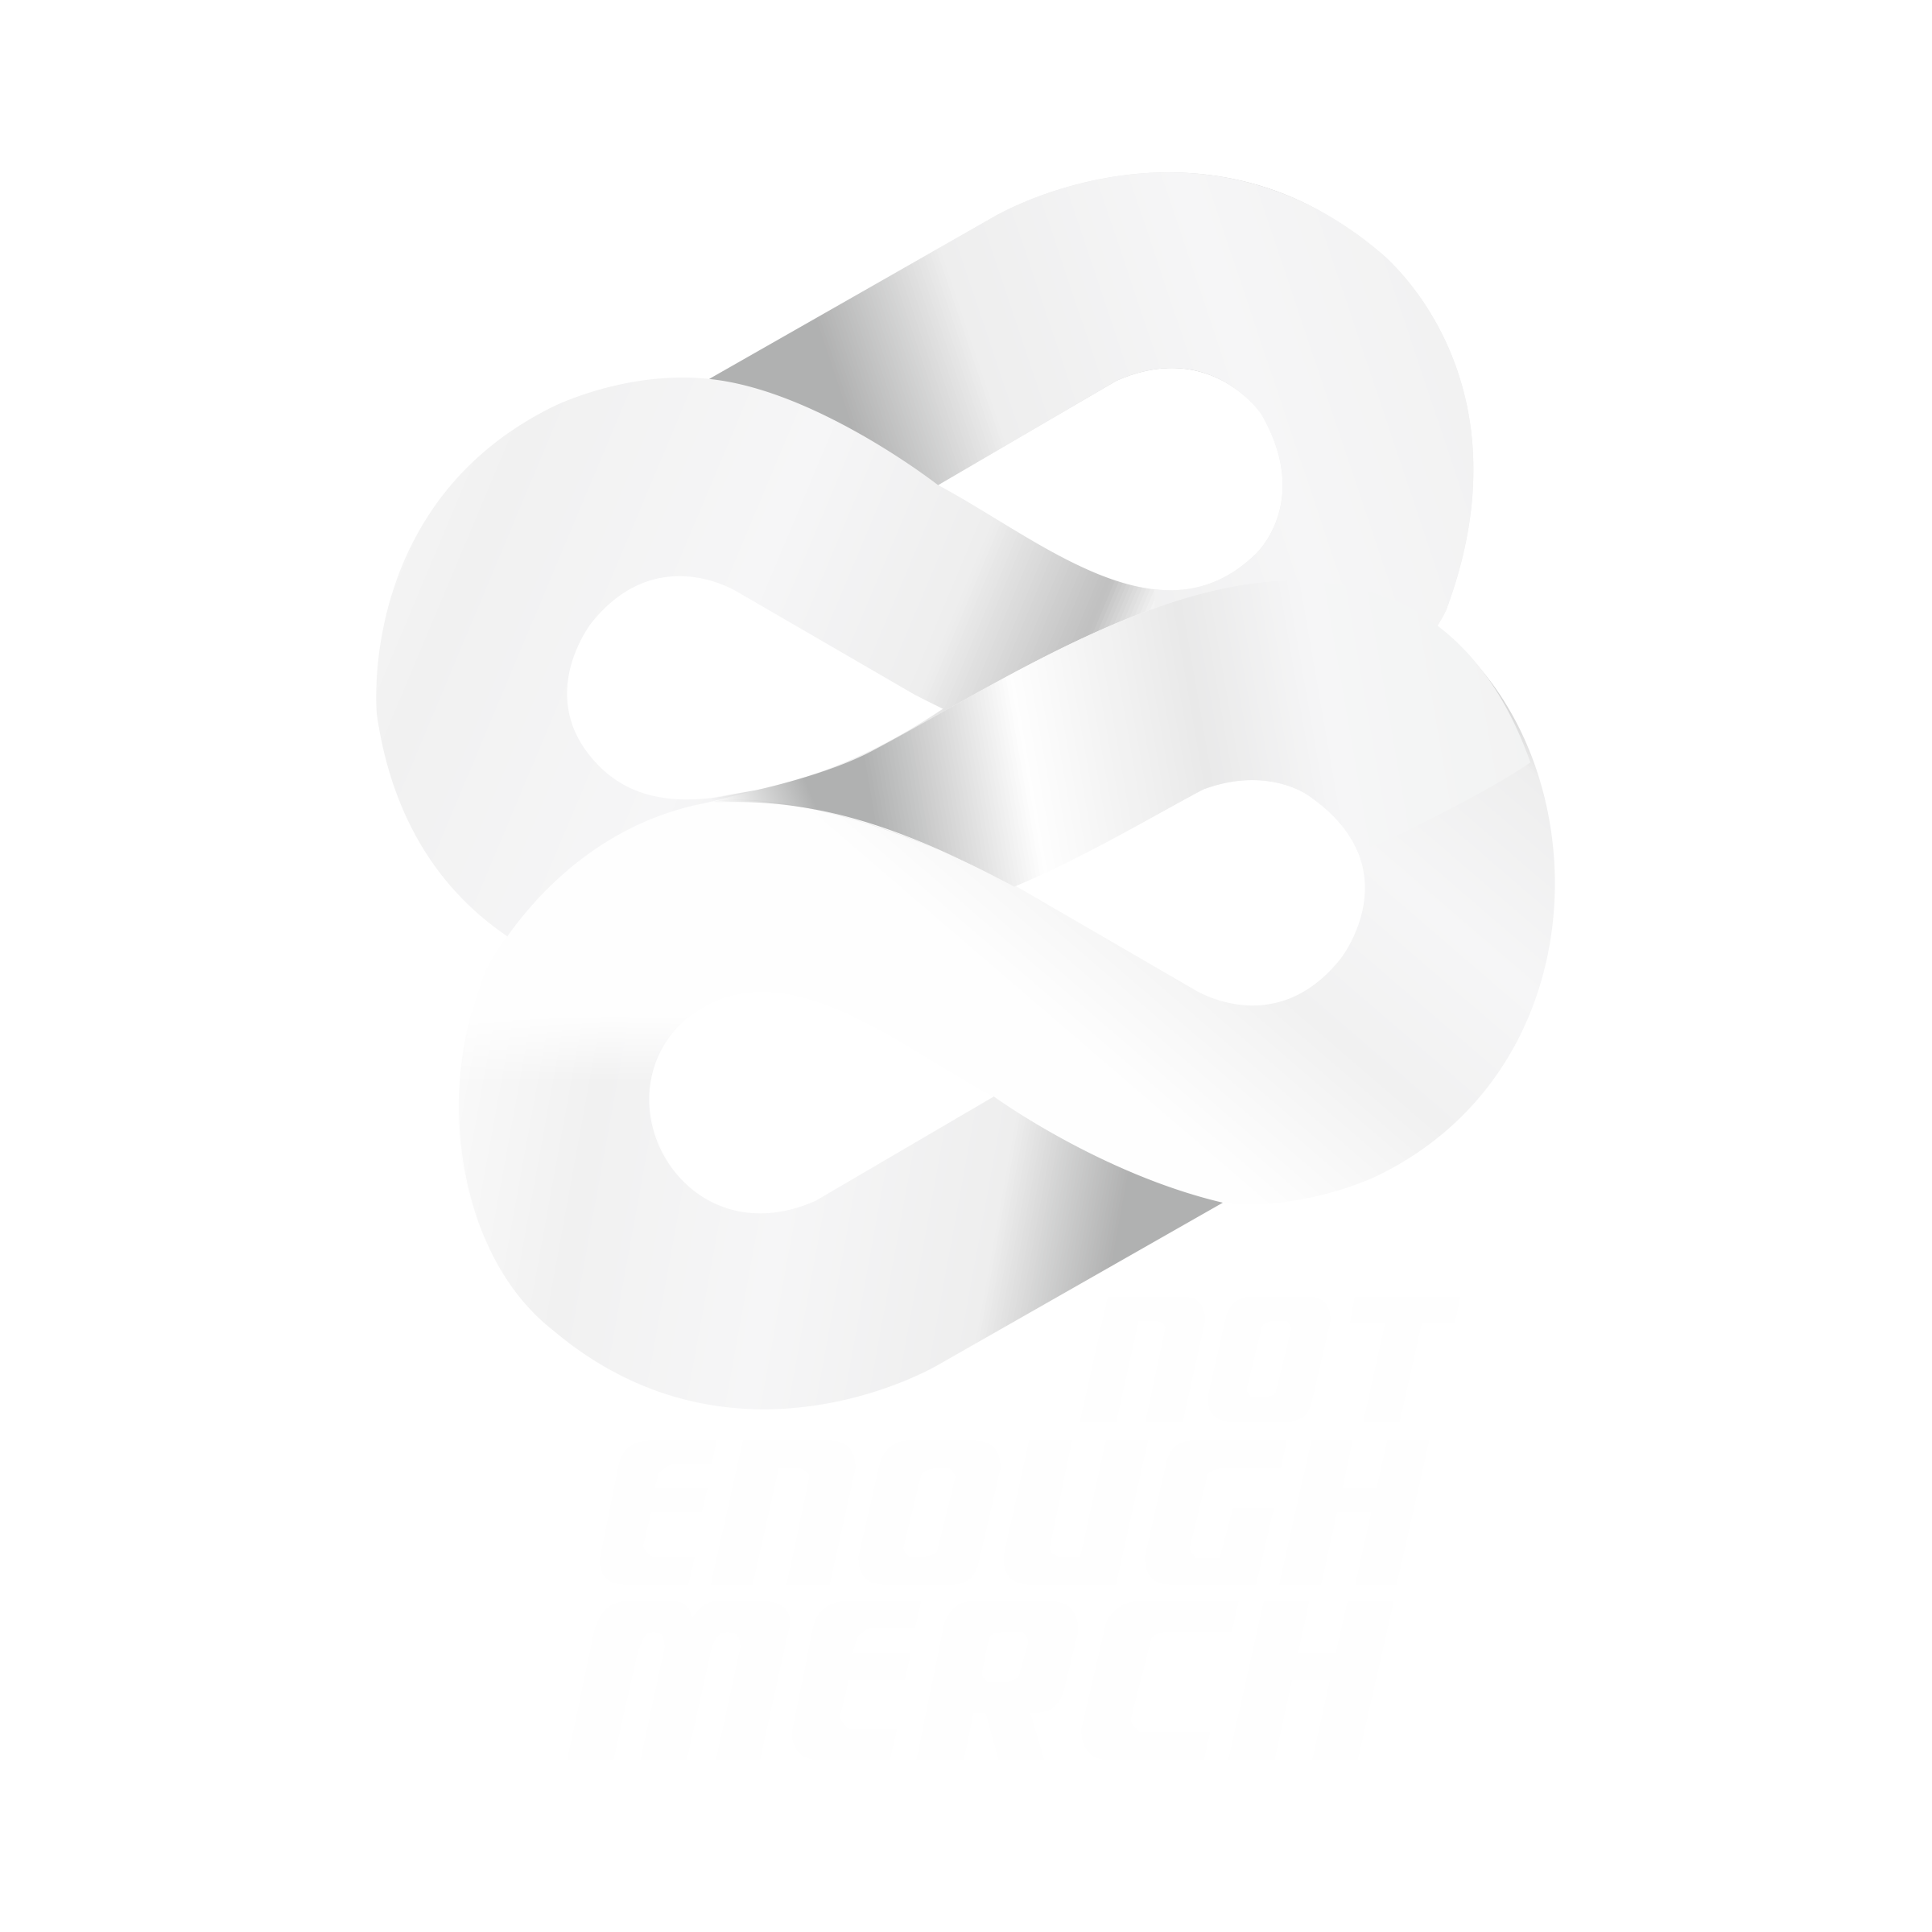 Not Enough Merch - Formula 1 Themed Apparel & Accessories for Everyone